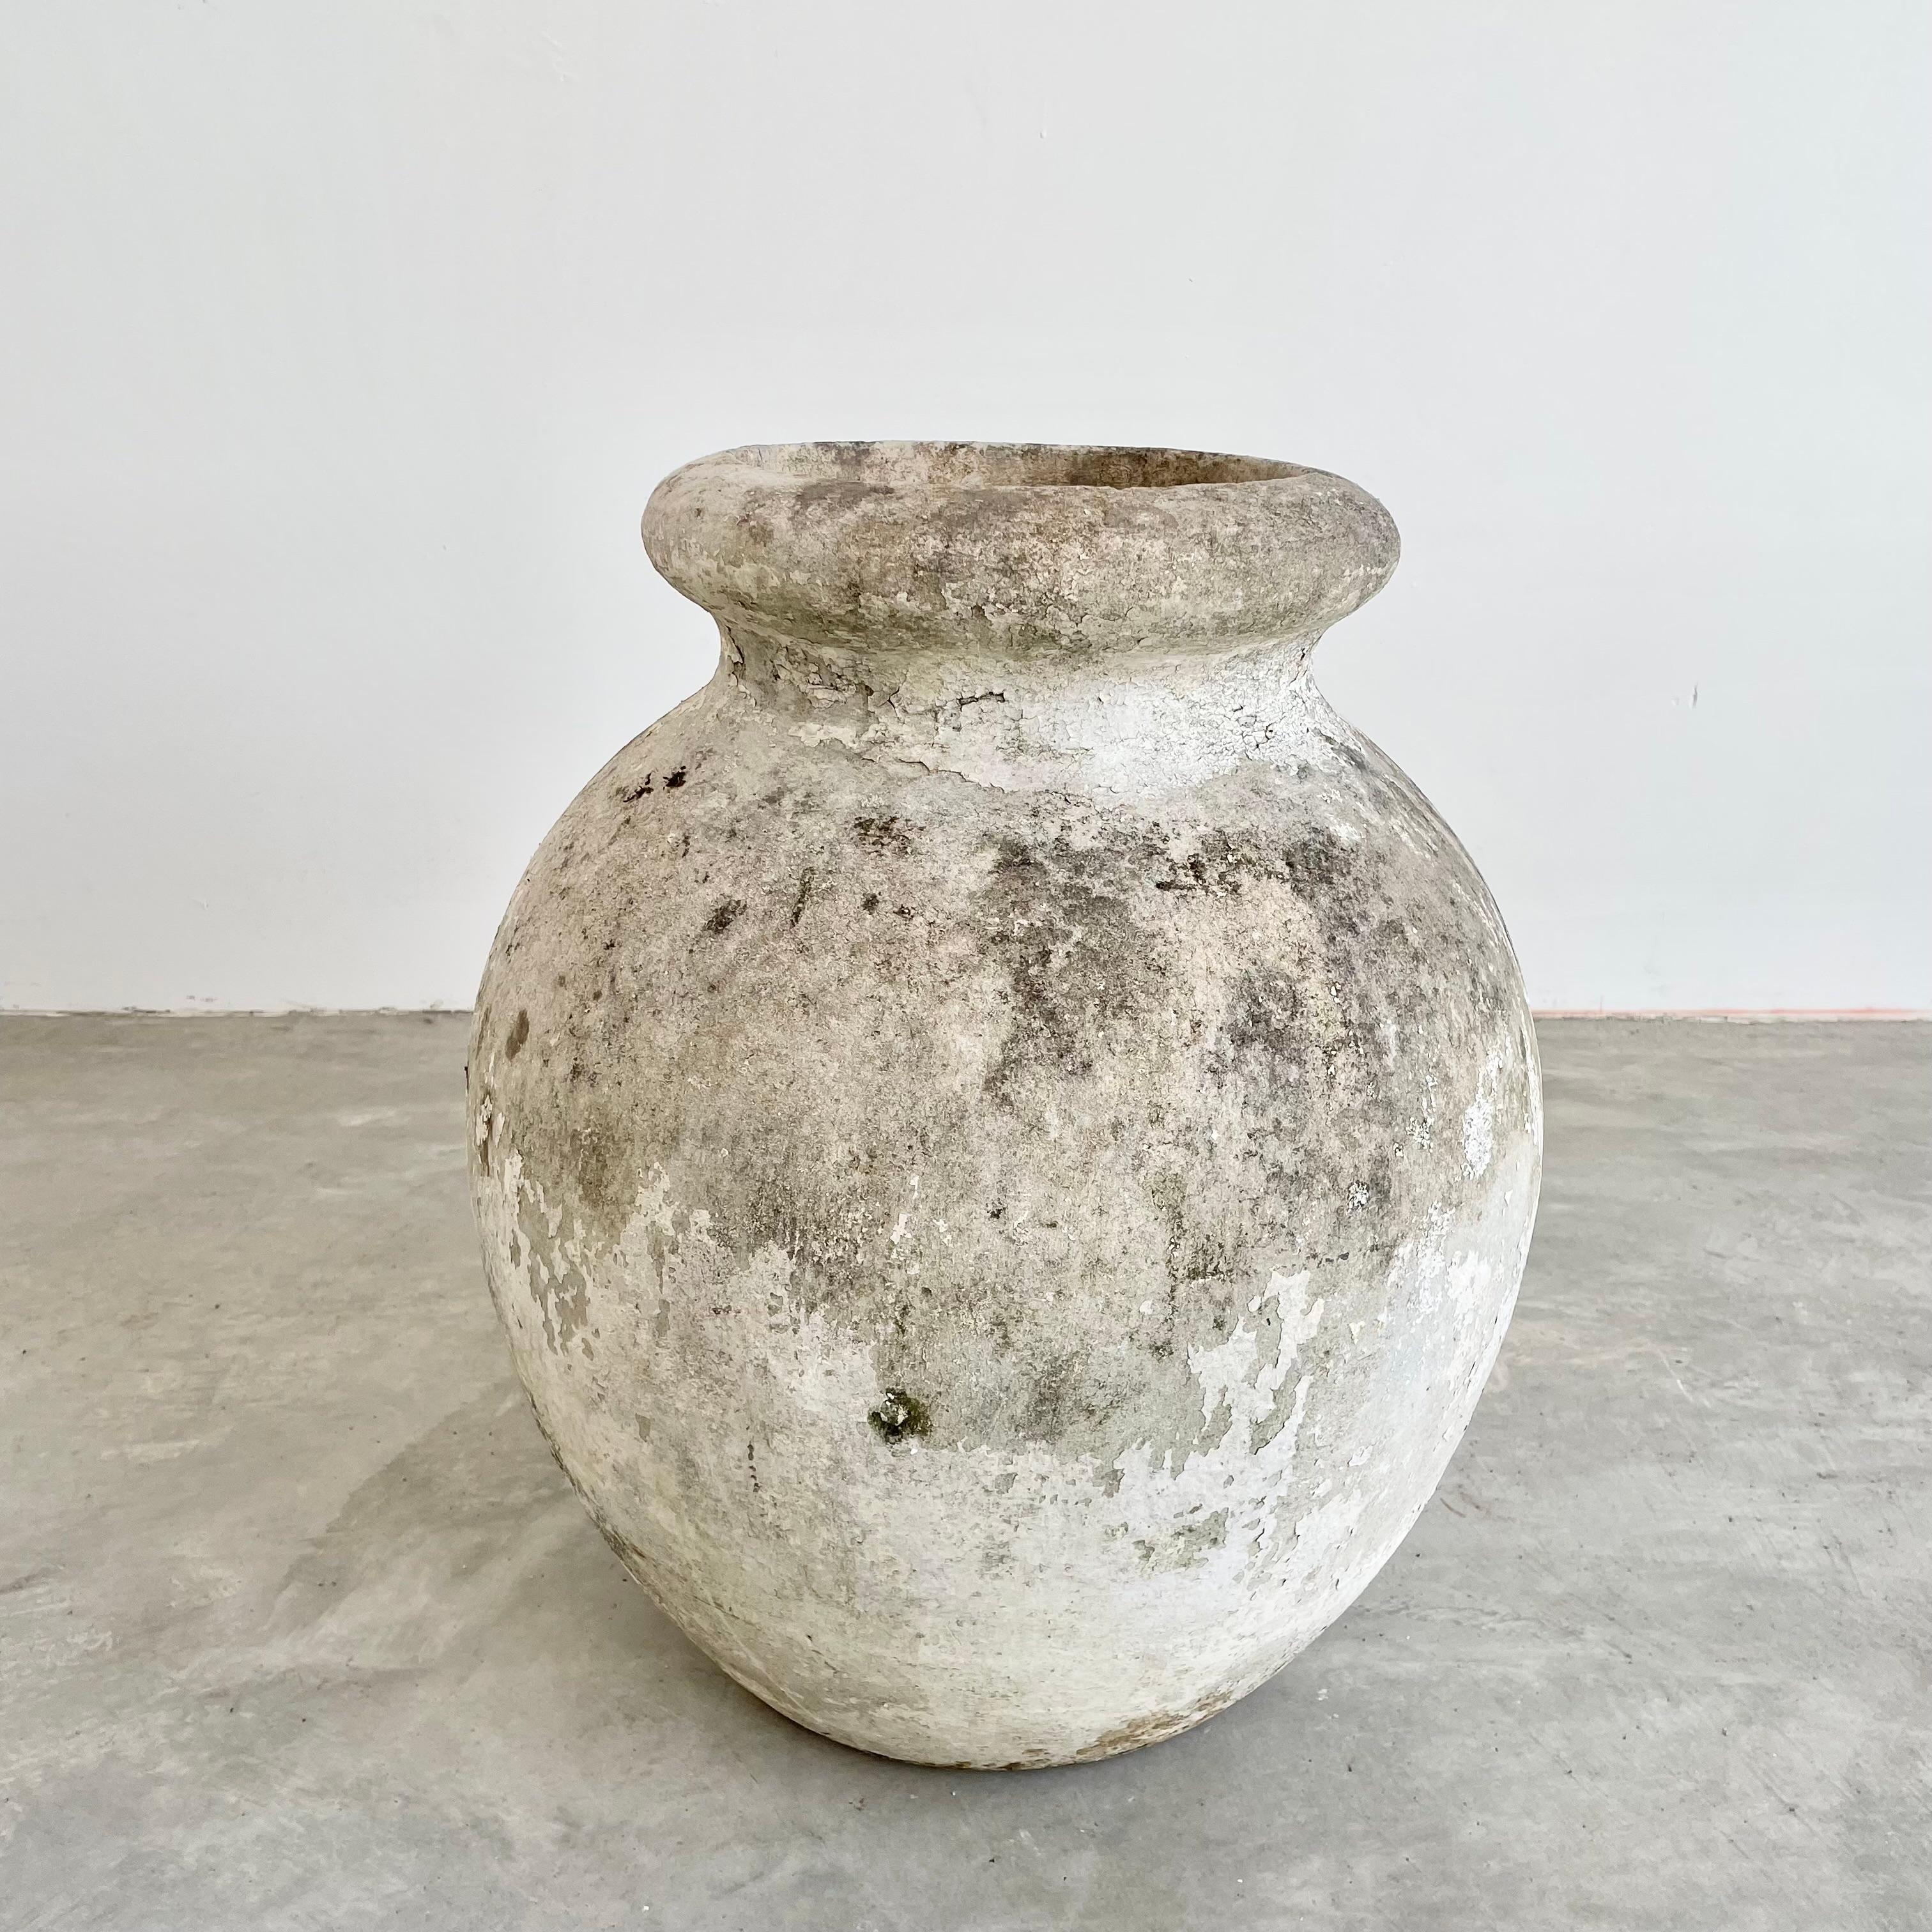 Concrete olive jar planter by Willy Guhl, with great patina and prominent presence. Classic jar shape with bulbous bottom tapering slim at the top with a thick rounded lip. Beautiful natural patina. Simple and elegant design. Perfect indoors or